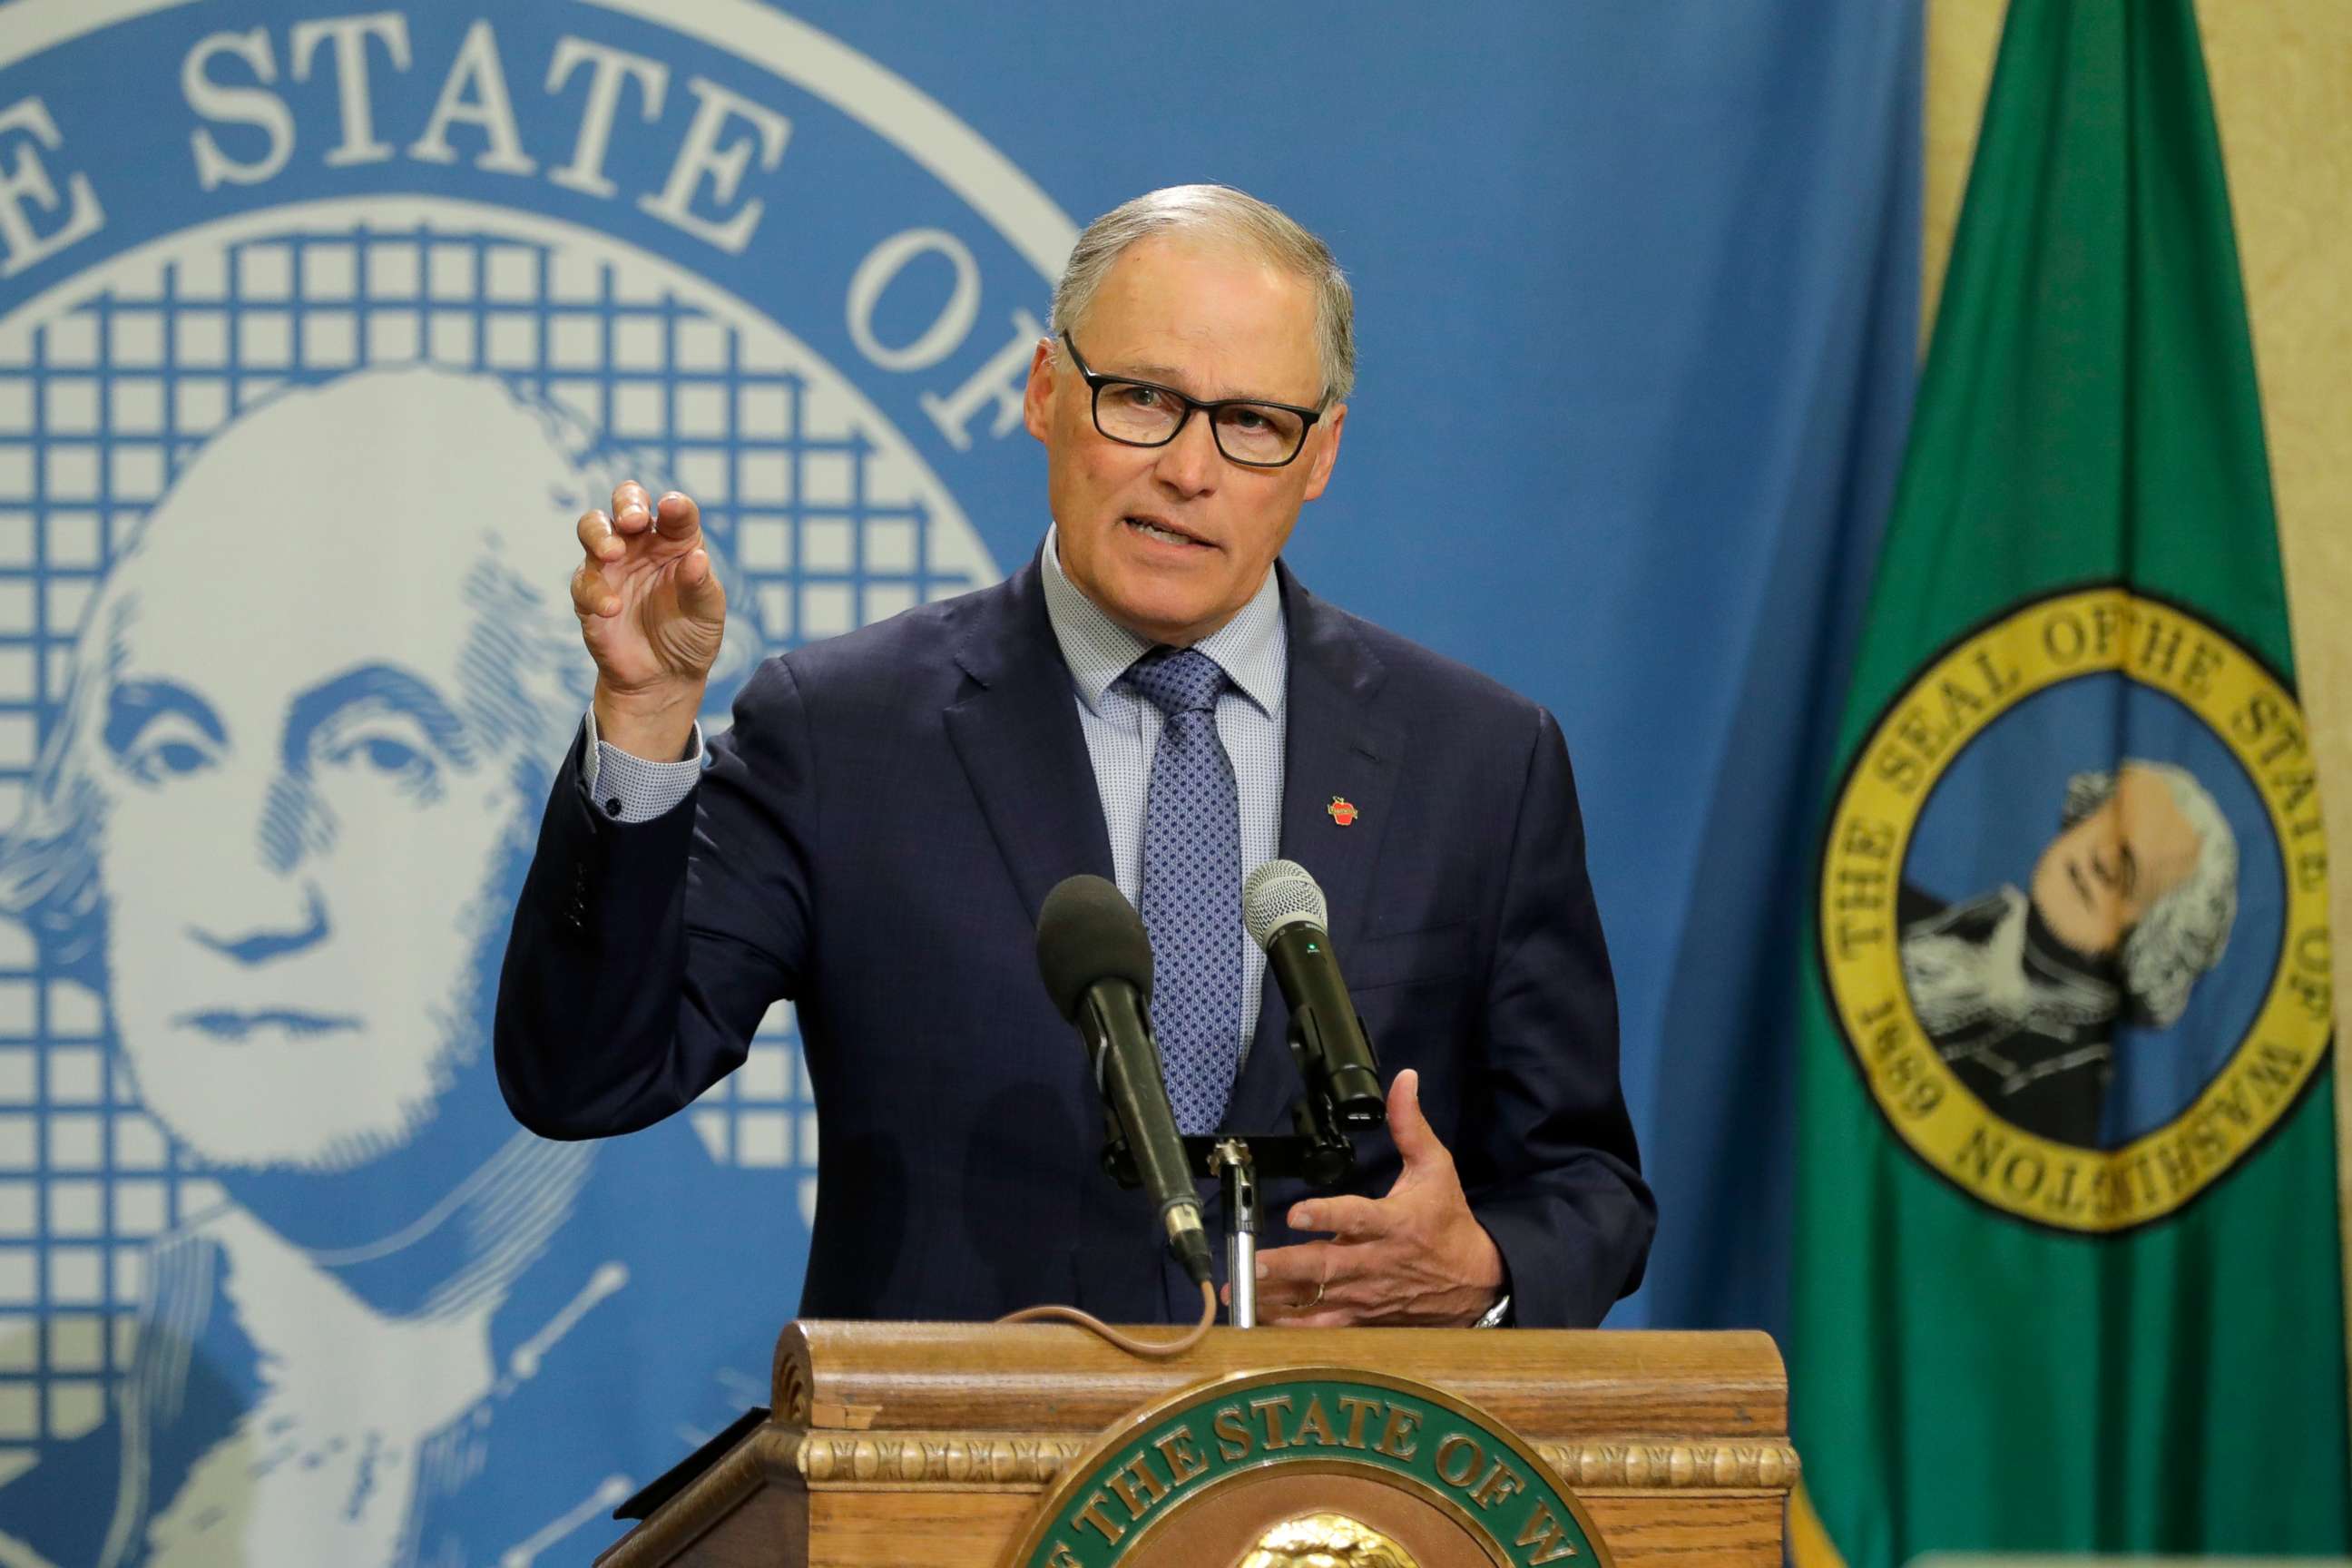 PHOTO: Washington Gov. Jay Inslee speaks during a news conference, April 13, 2020, at the Capitol in Olympia, Wash.